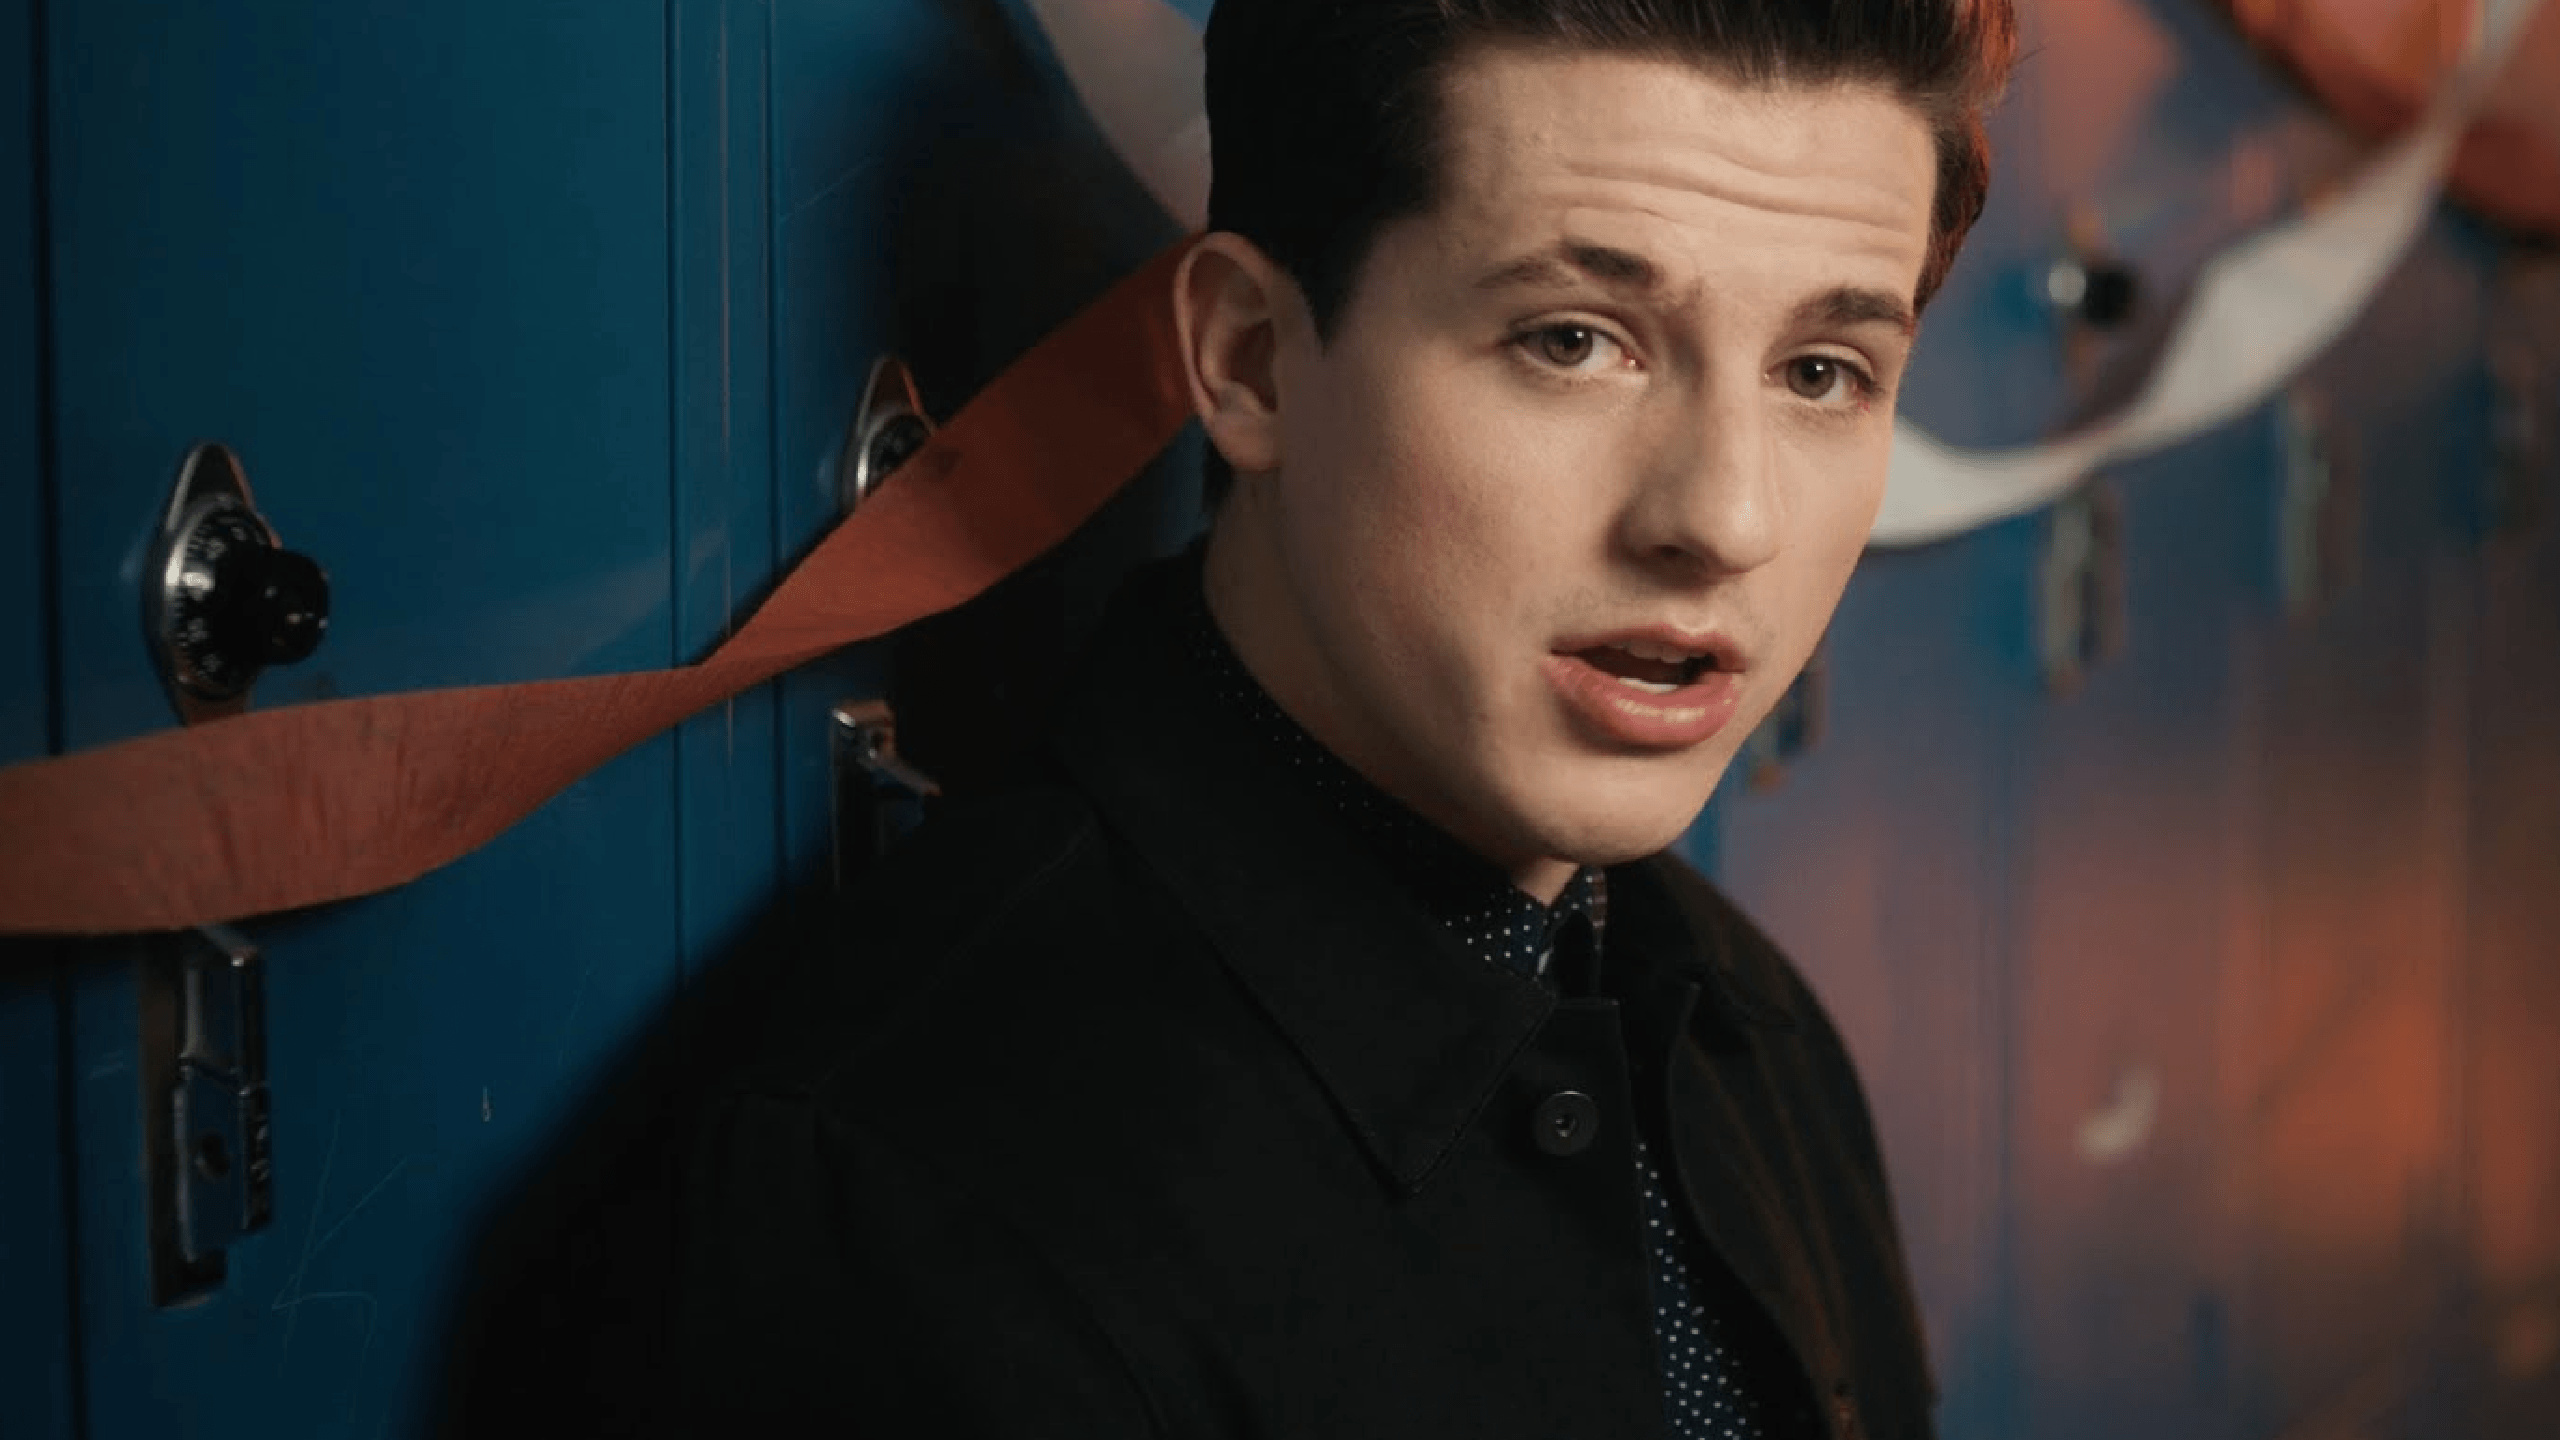 Charlie Puth: The single, “One Call Away”, Reached number 12 on the Billboard Hot 100. 2560x1440 HD Background.